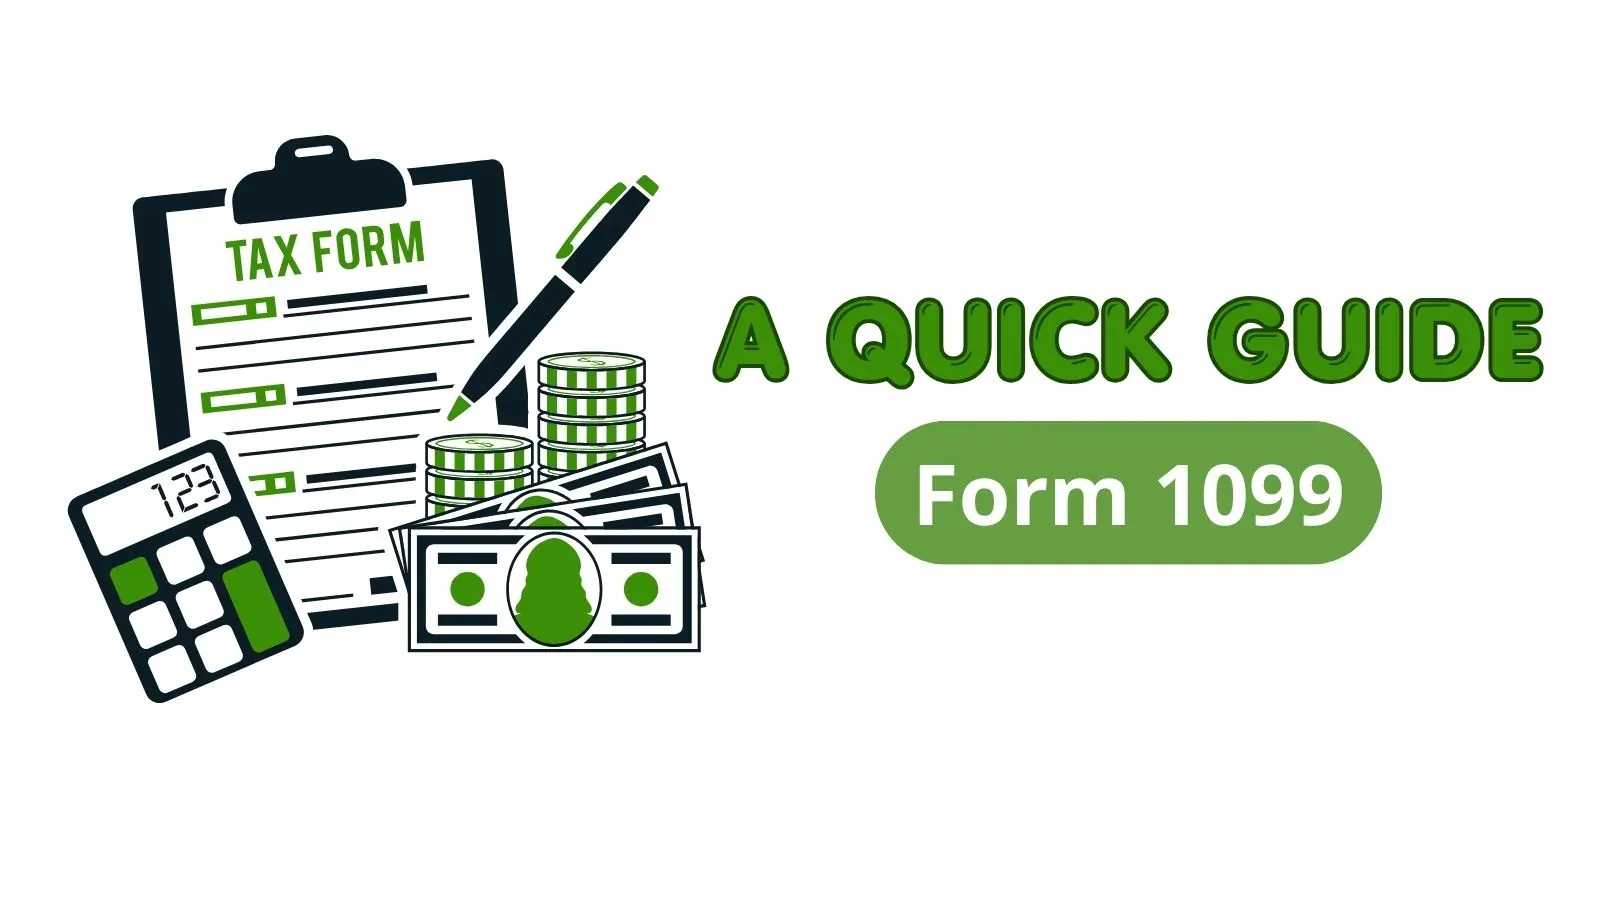 A quick guide to file form 1099